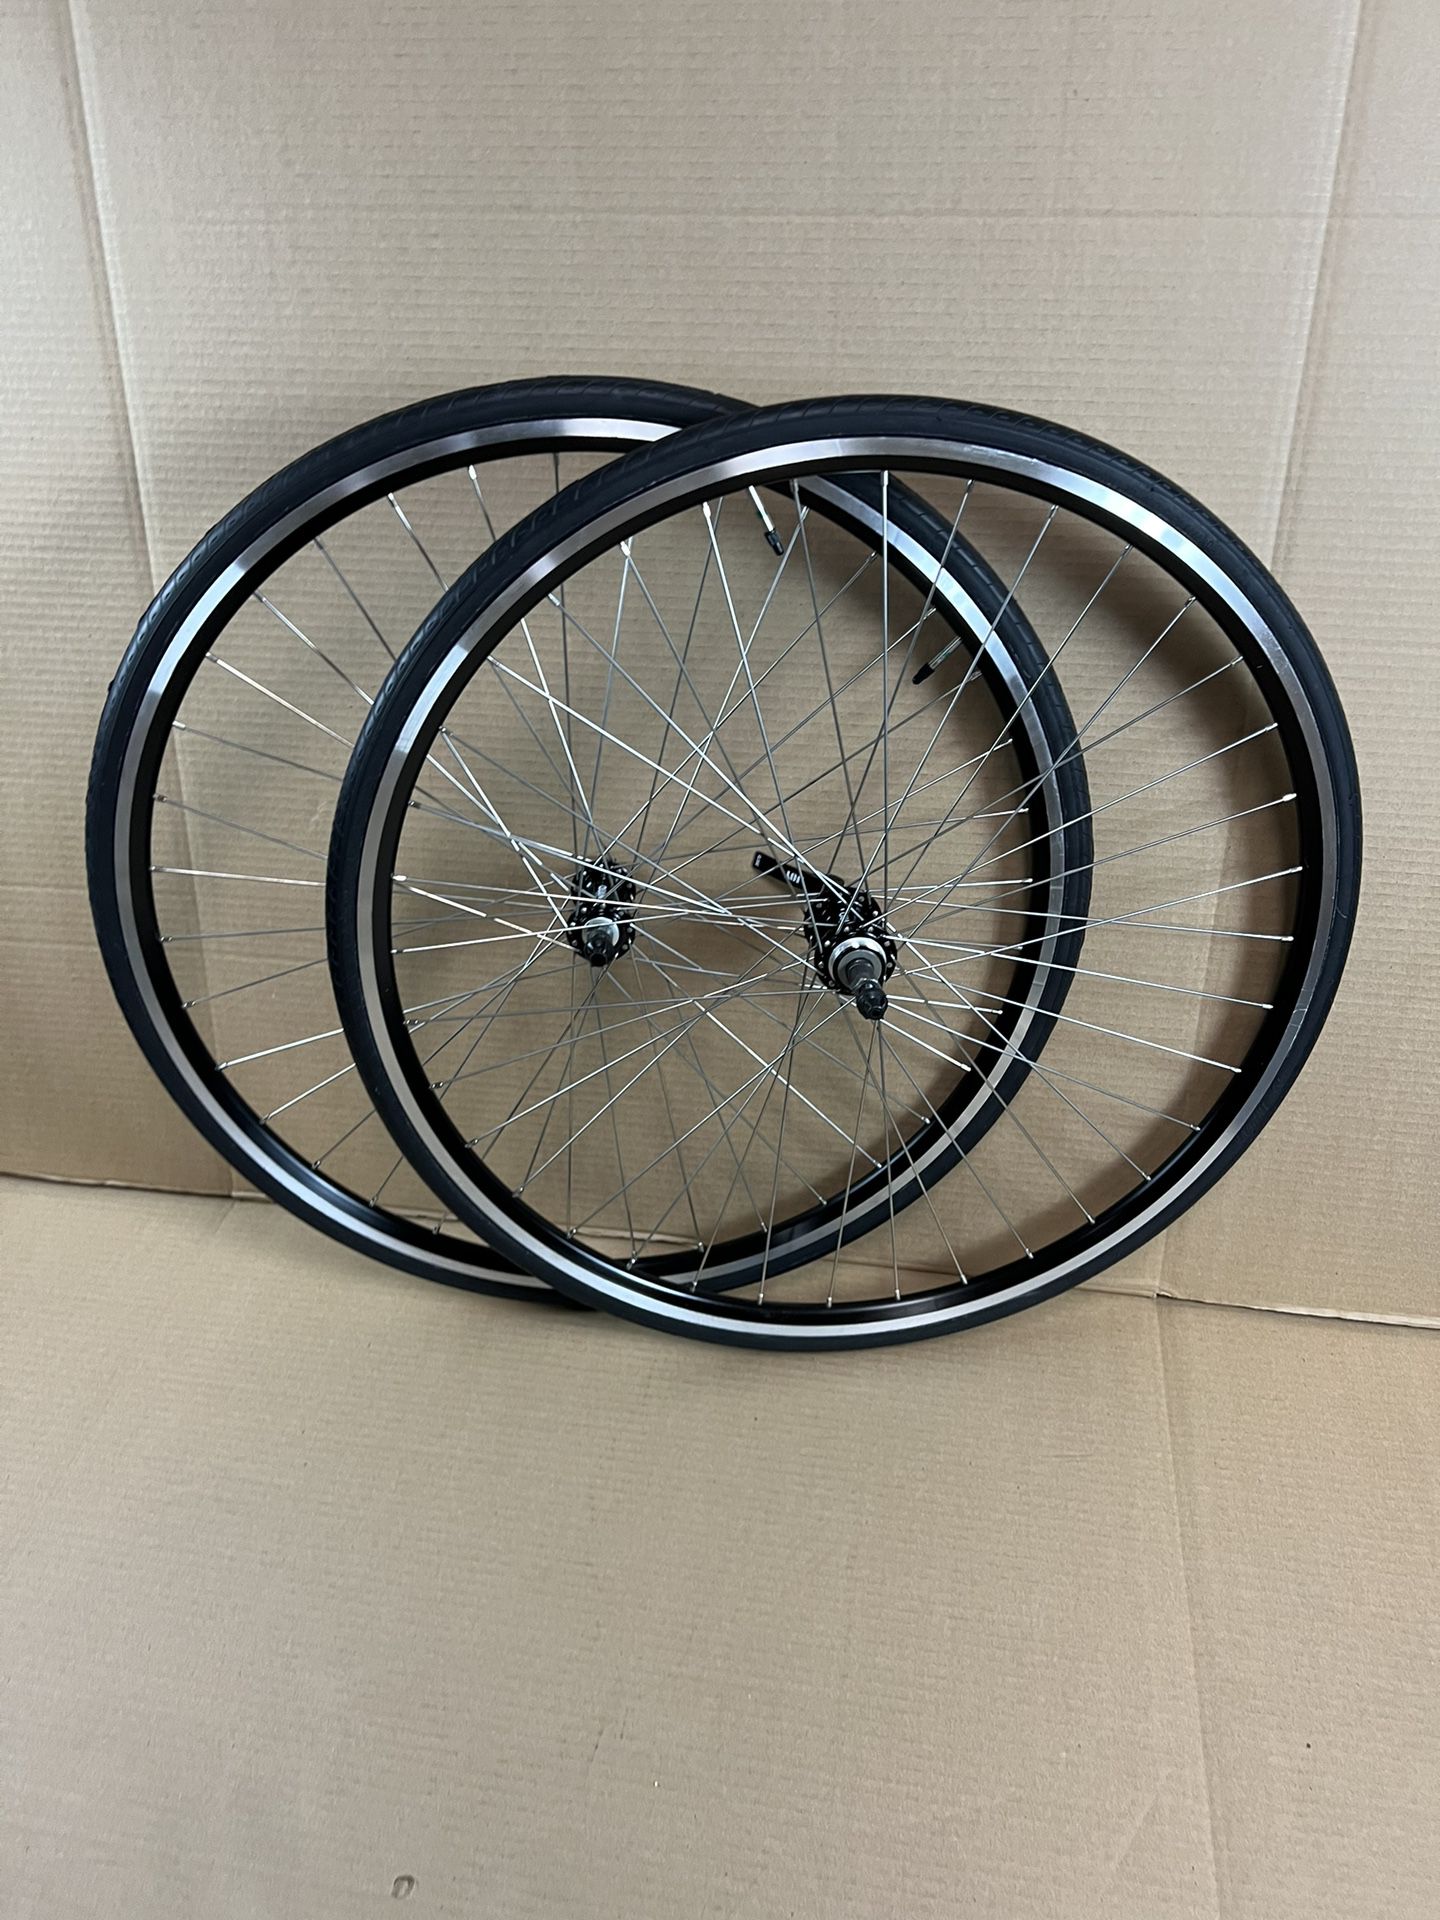 Road Bike Bicycle 700C Double Wall Alloy Wheelset - Compatible with 6/7/8 Speed Thread-on Freewheel  $199